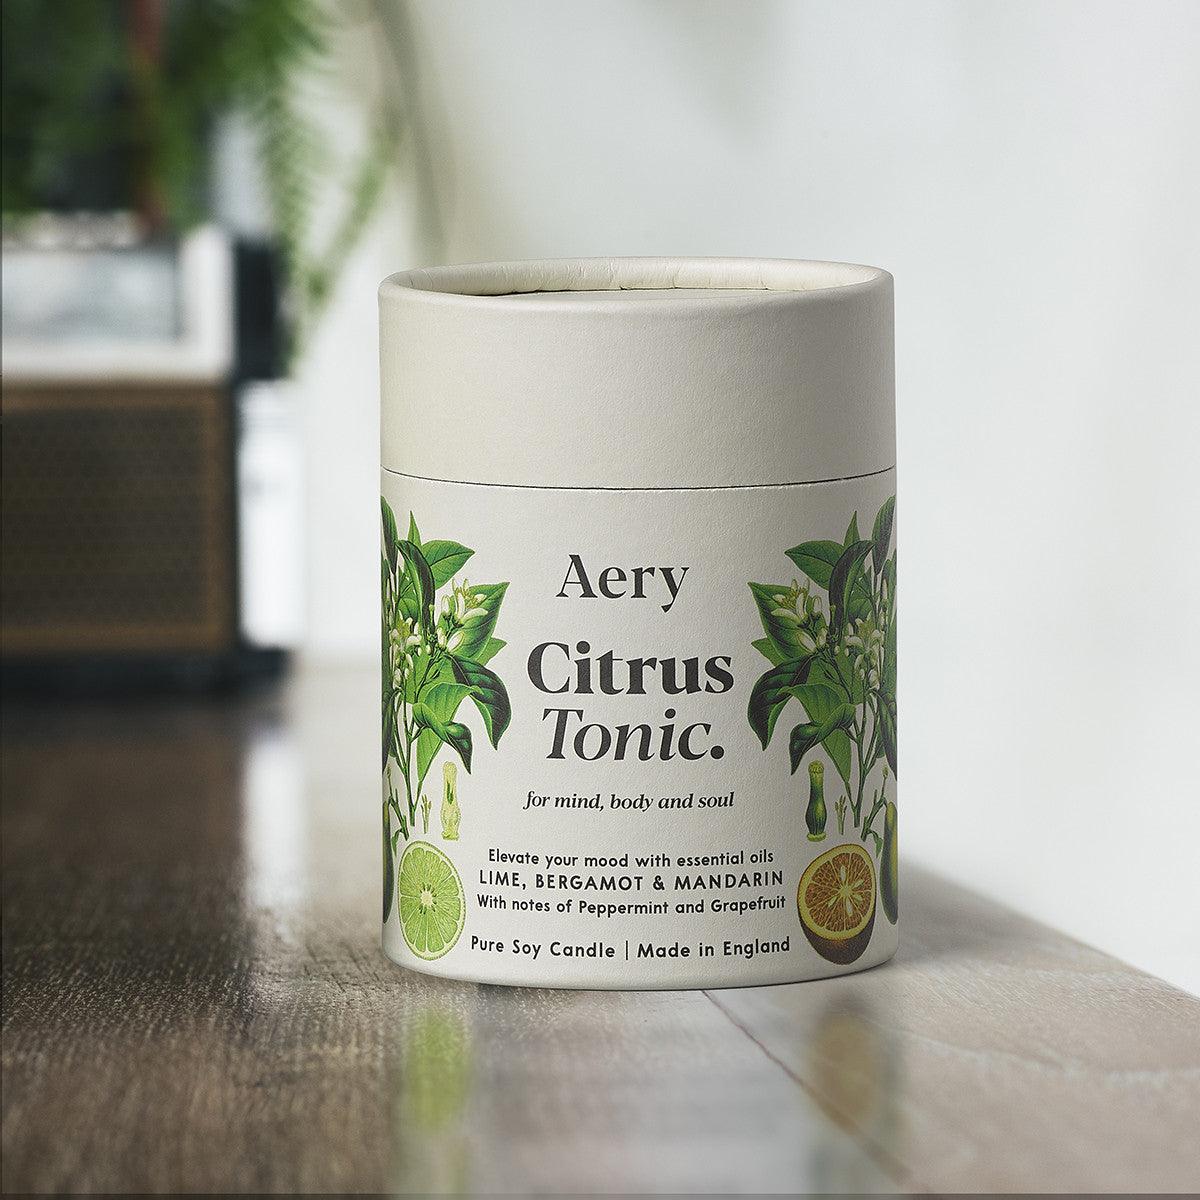 Aery Living Botanical 200g Soy Candle - Citrus Tonic | Scented Candles | Candle Fragrances | Soy Candles | Newcastle Candles | Best Candles | Nice Candles | Gifts | Best Gifts | Wax Candles | Mothers Day Gifts | Christmas Gifts | Candles Australia | Candle Shop | Presents | Sydney Candles | Brisbane Candles | Queensland Candles | Darwin Candles | Broom Candles | Soy Wax | Accepts Bitcoin | Candles Online | Accepts Crypto currency | Upcycle Studio